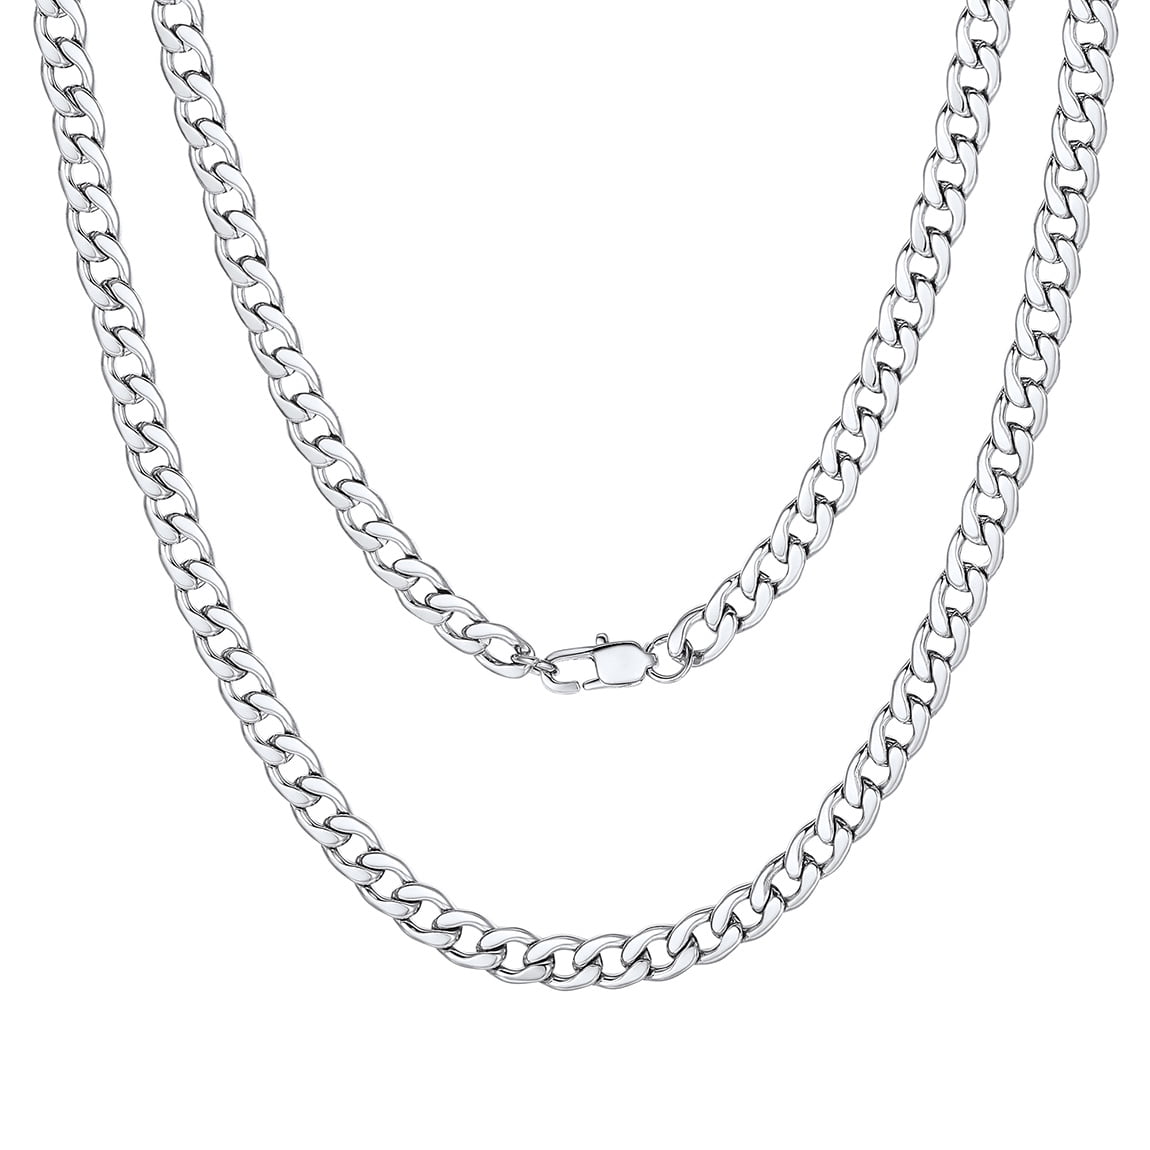 Fashion Frill Men's Jewellery Silver Chain For Boys Elegant Stainless Steel  Necklace Silver Chain Double Coated Chains For Men Neck Chain Necklace Boys 22  Inches : Amazon.in: Fashion